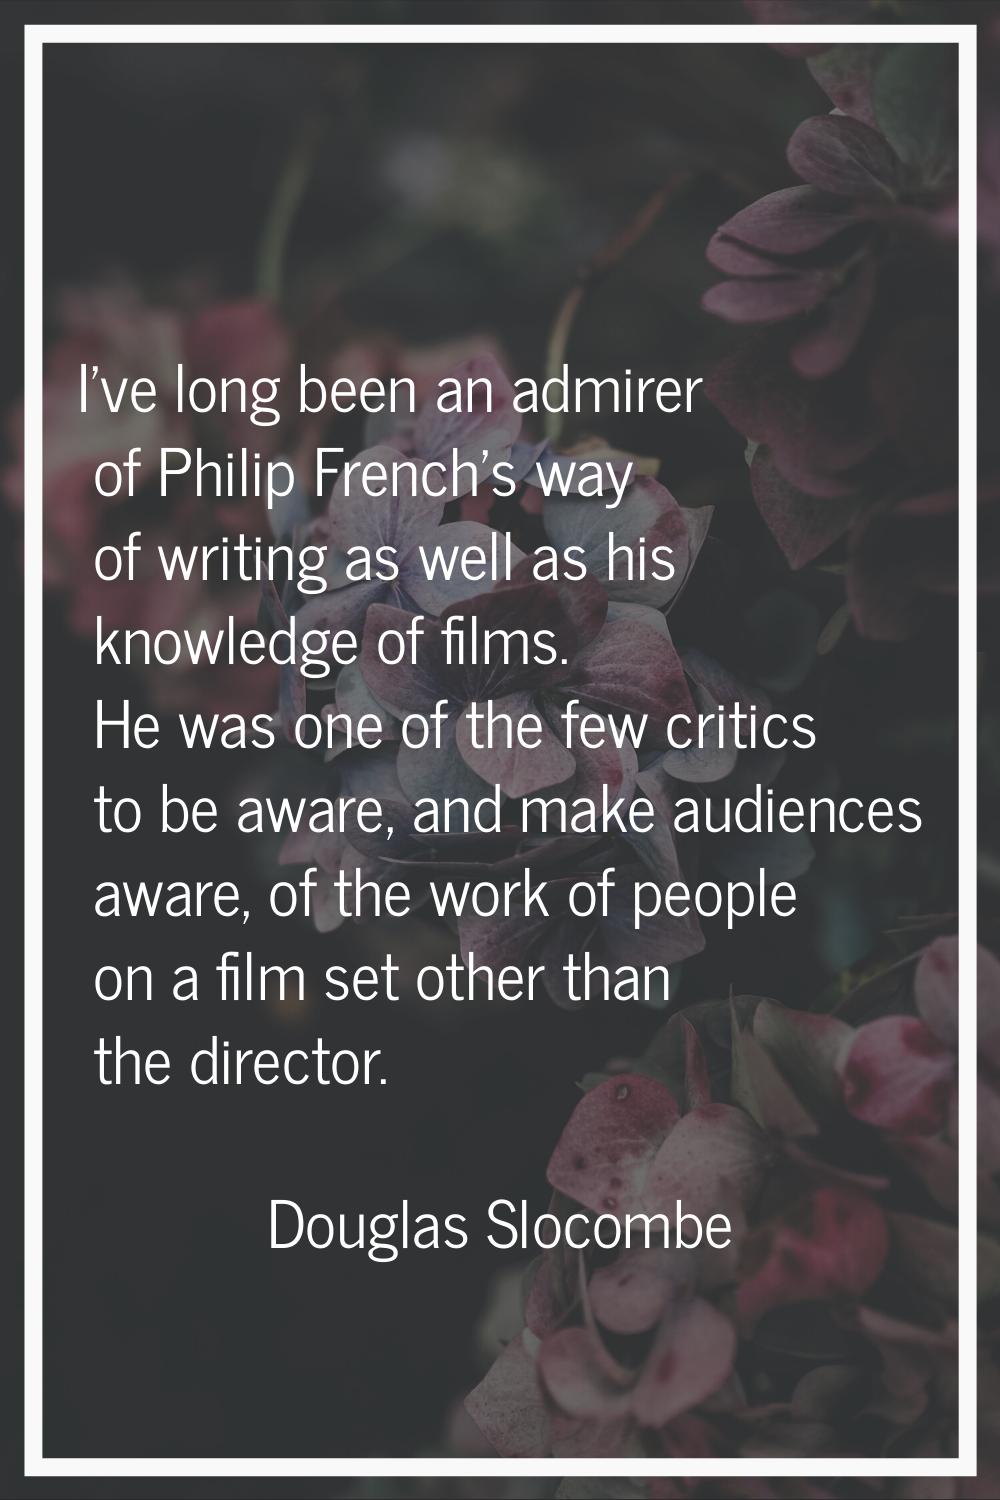 I've long been an admirer of Philip French's way of writing as well as his knowledge of films. He w